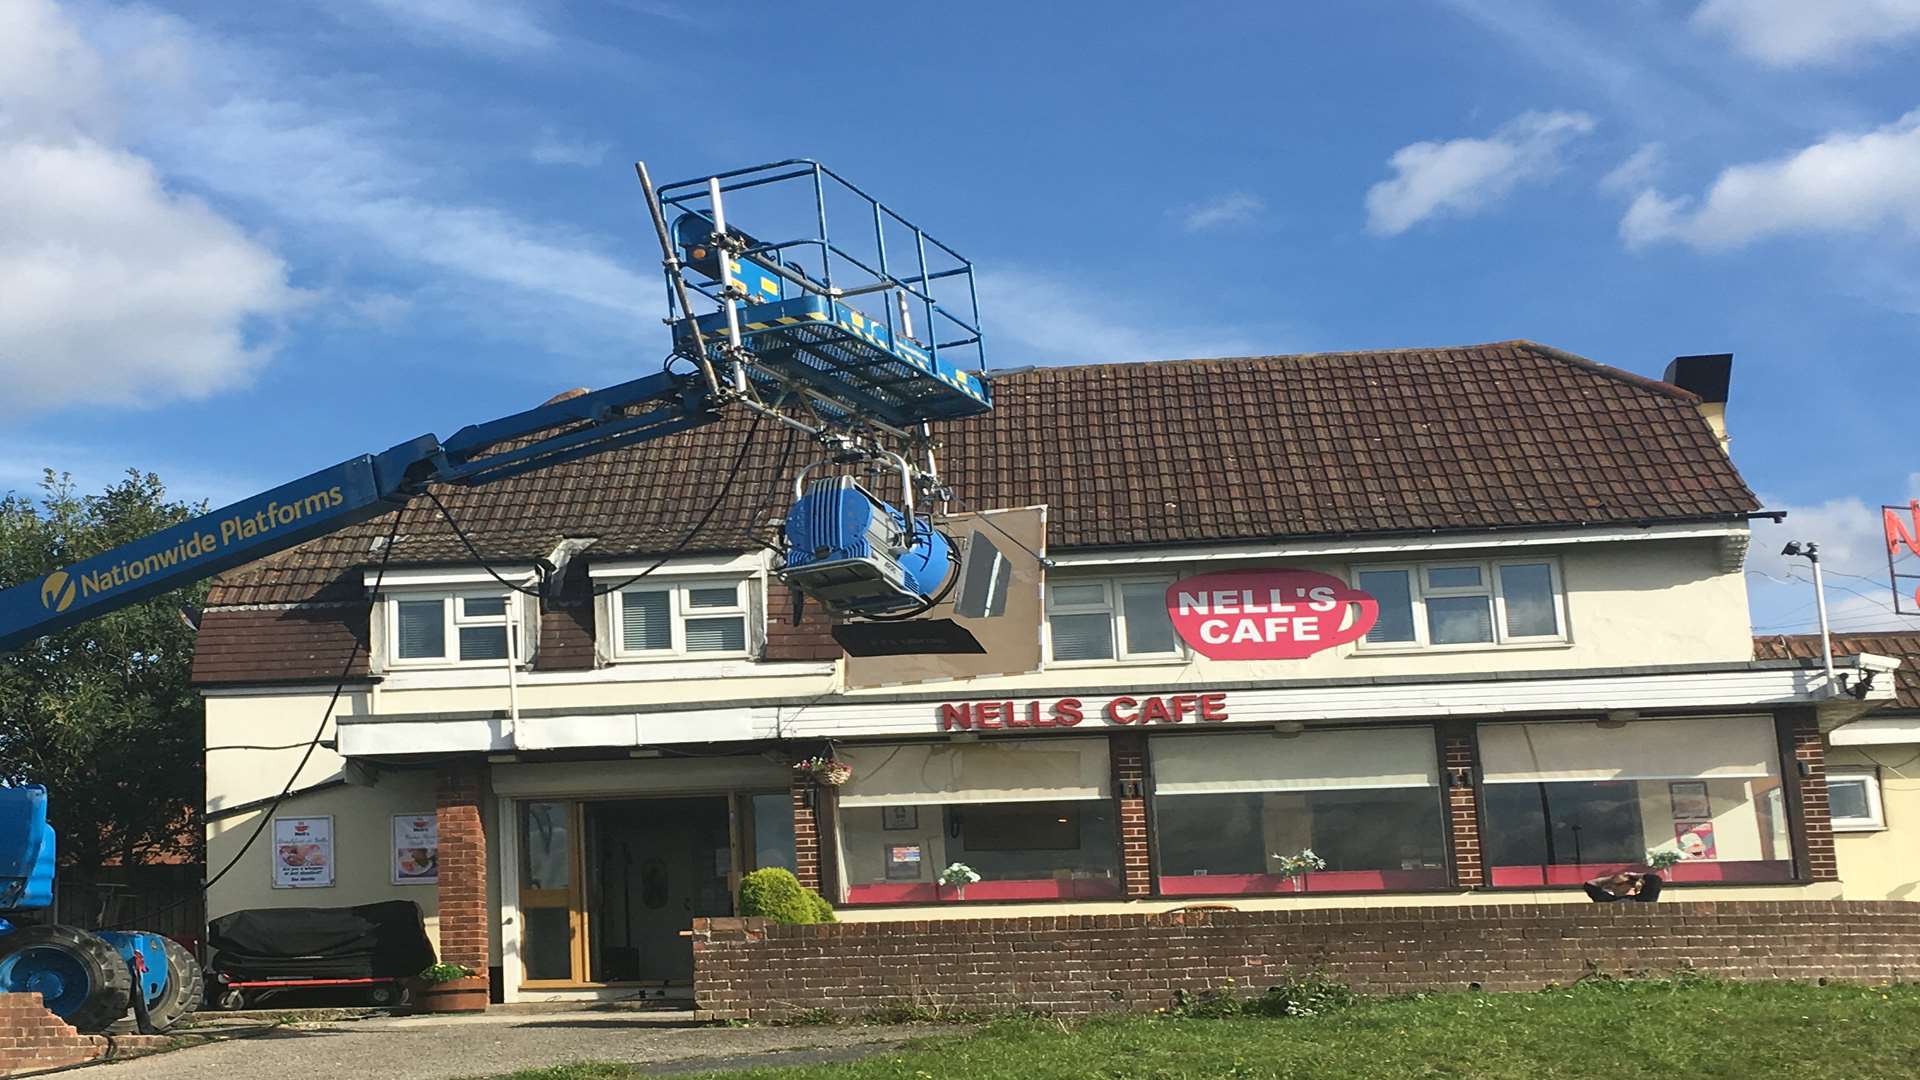 Film crews were at Nell's cafe in Gravesend filming for BBC America drama Killing Eve